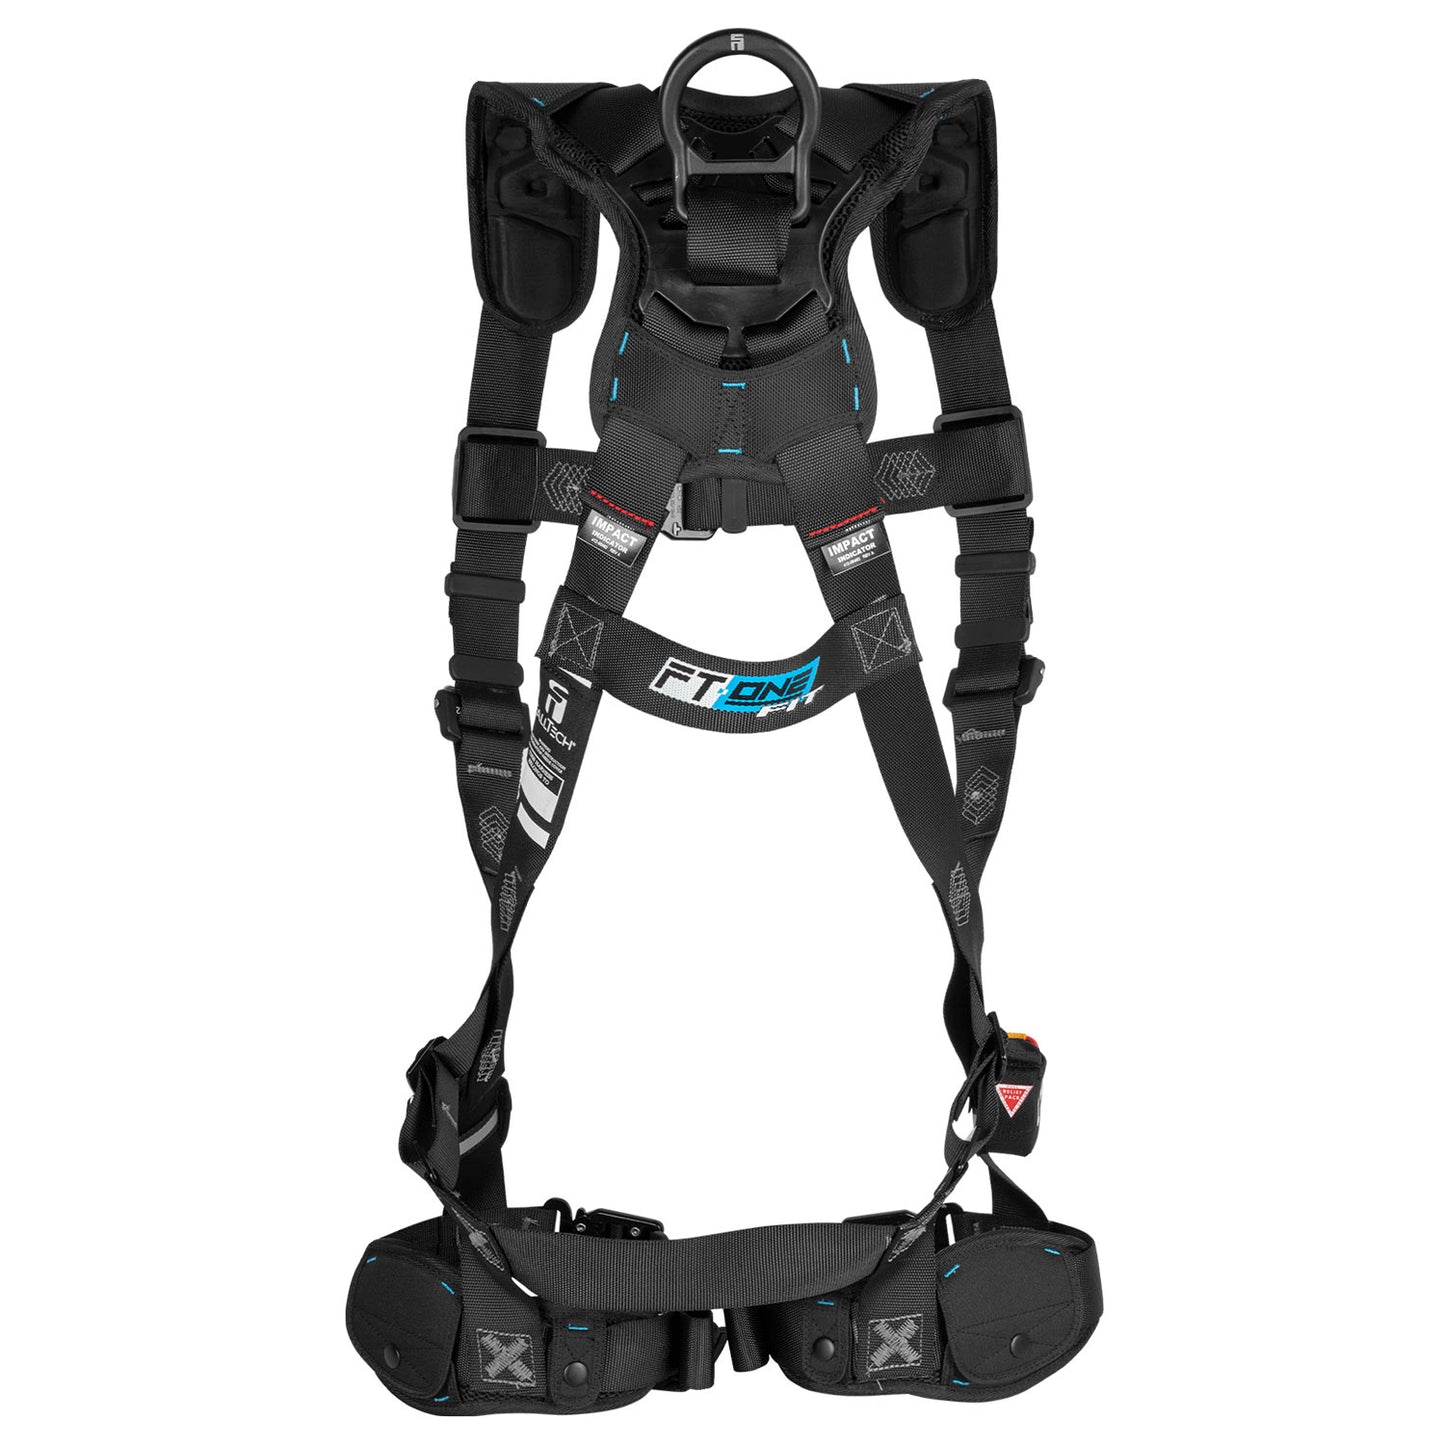 FallTech FT-One Fit Women's Safety Harness w/ Trauma Straps | Non-Belted | XS | 8129QCXS